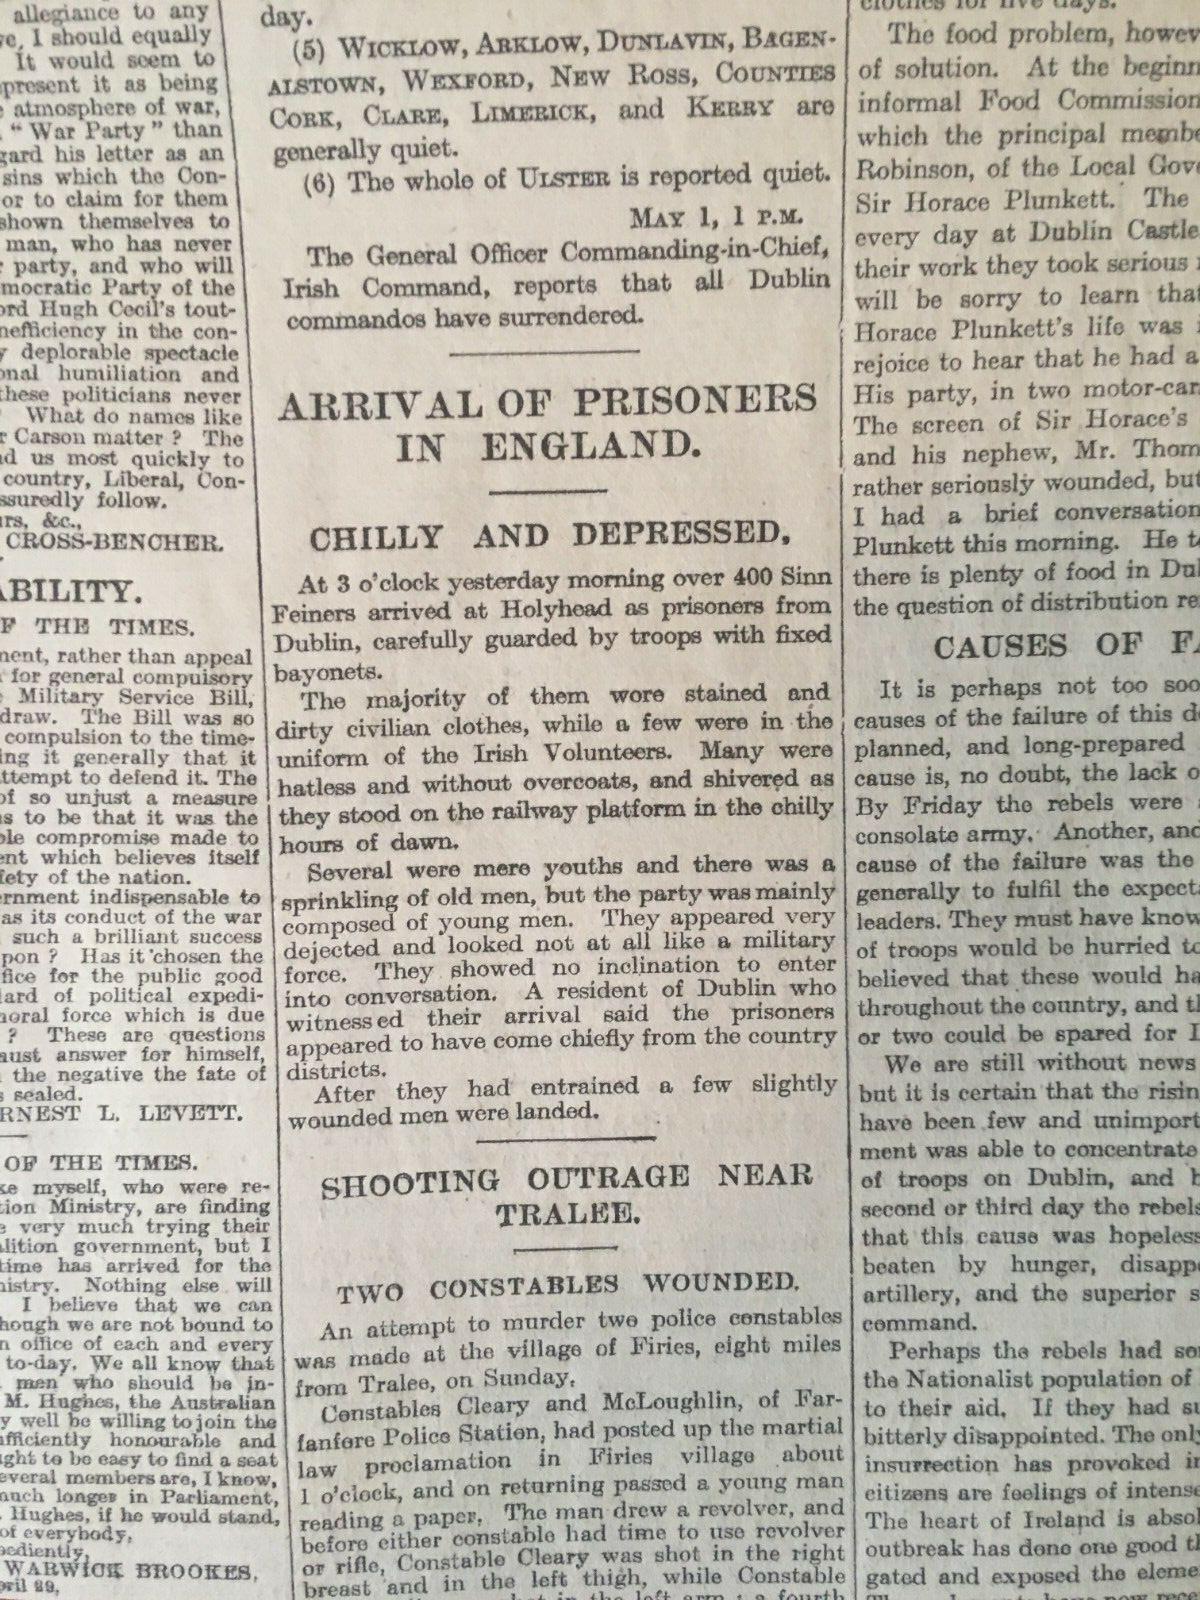 Easter Rising Rebellion 1916 Original Complete Newspaper 2nd May Images & Reports - Image 5 of 12